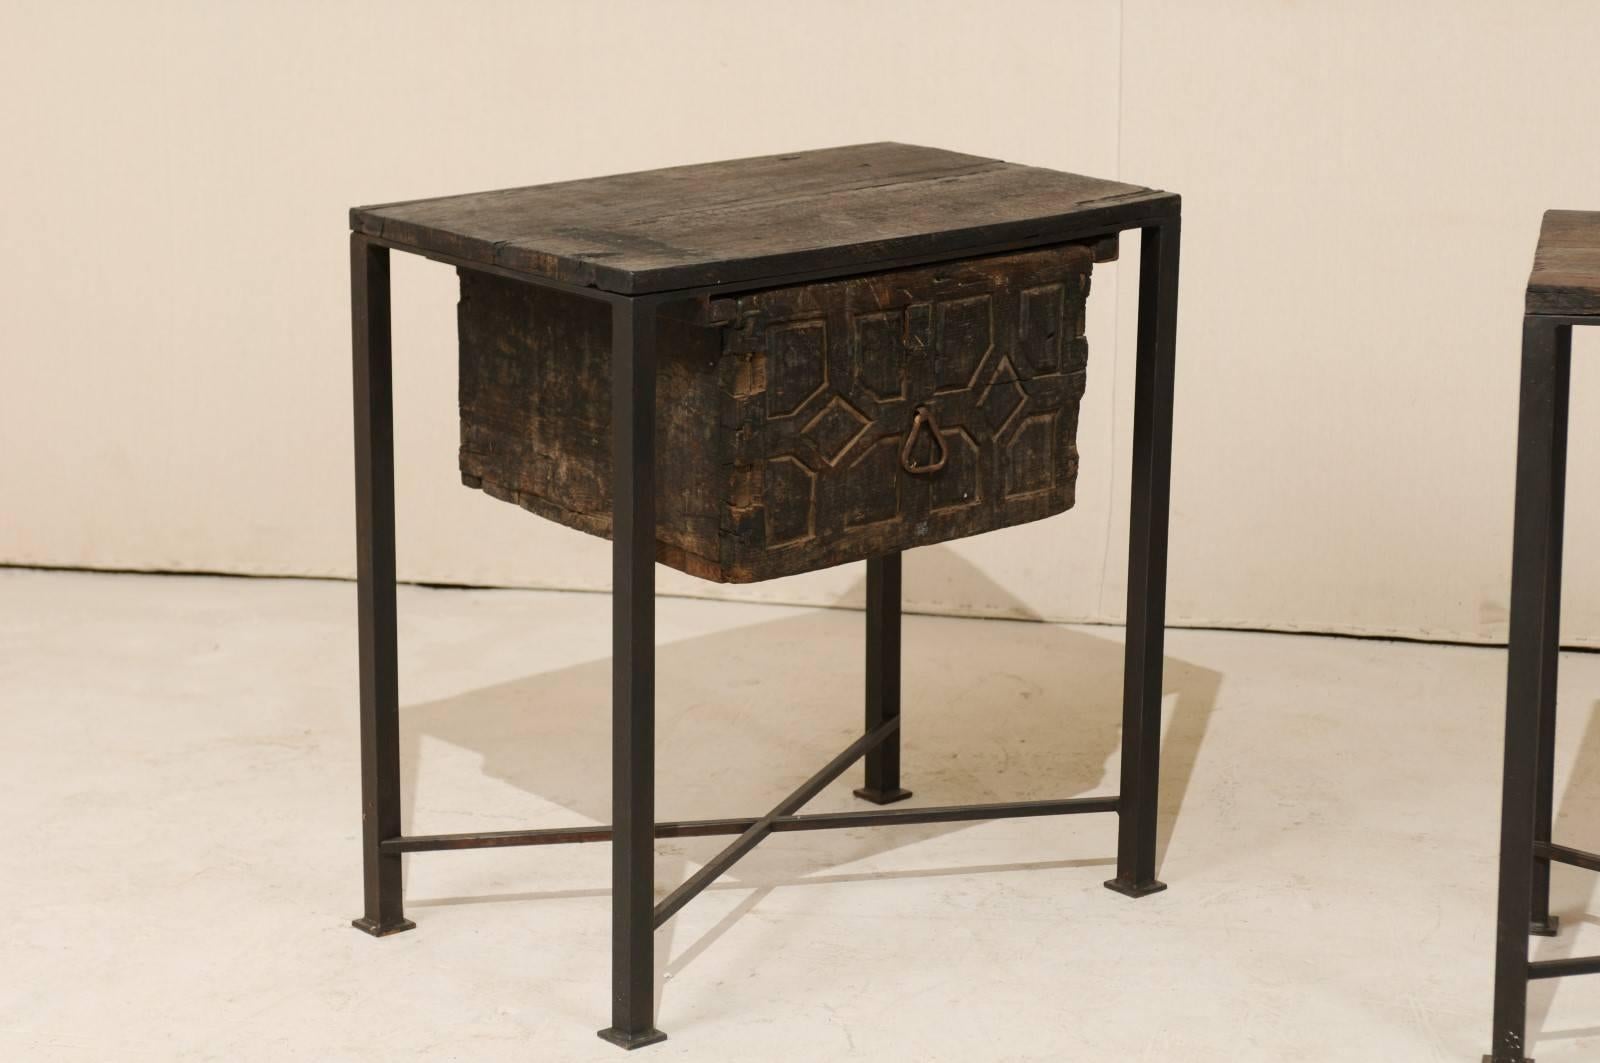 Rustic Pair of 18th Century Spanish Wood Chests on Iron Bases with Geometric Carvings